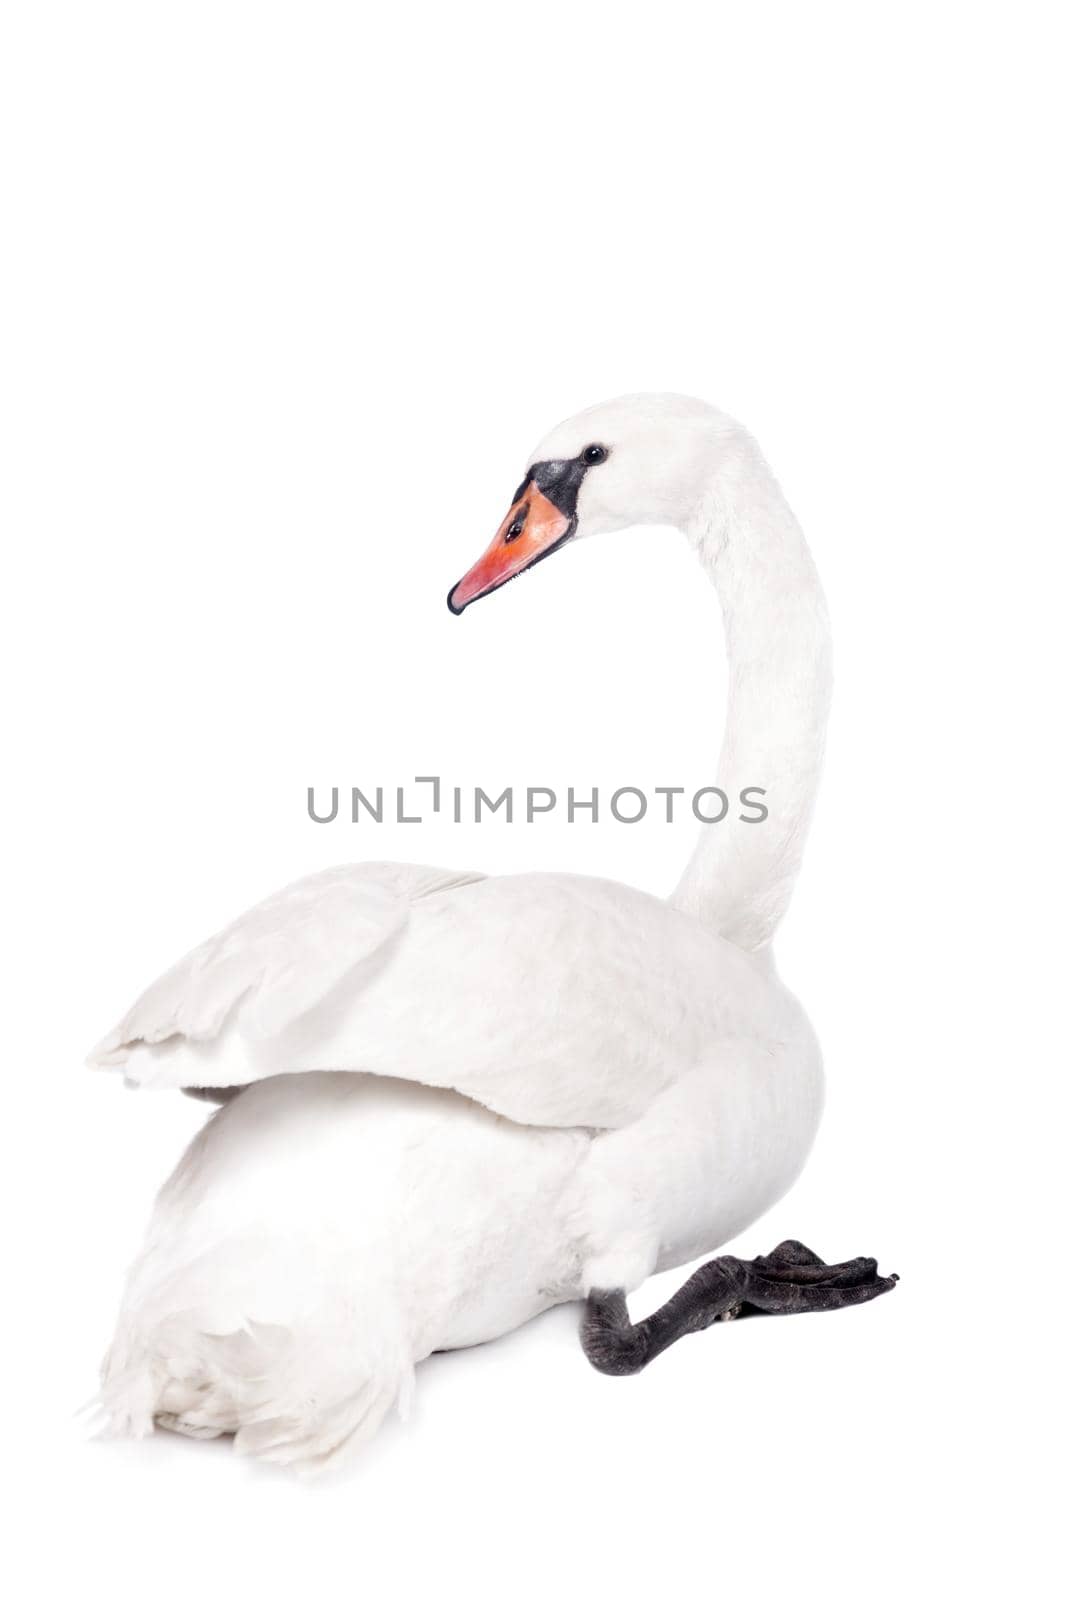 The mute swan, cygnus olor, on white by RosaJay